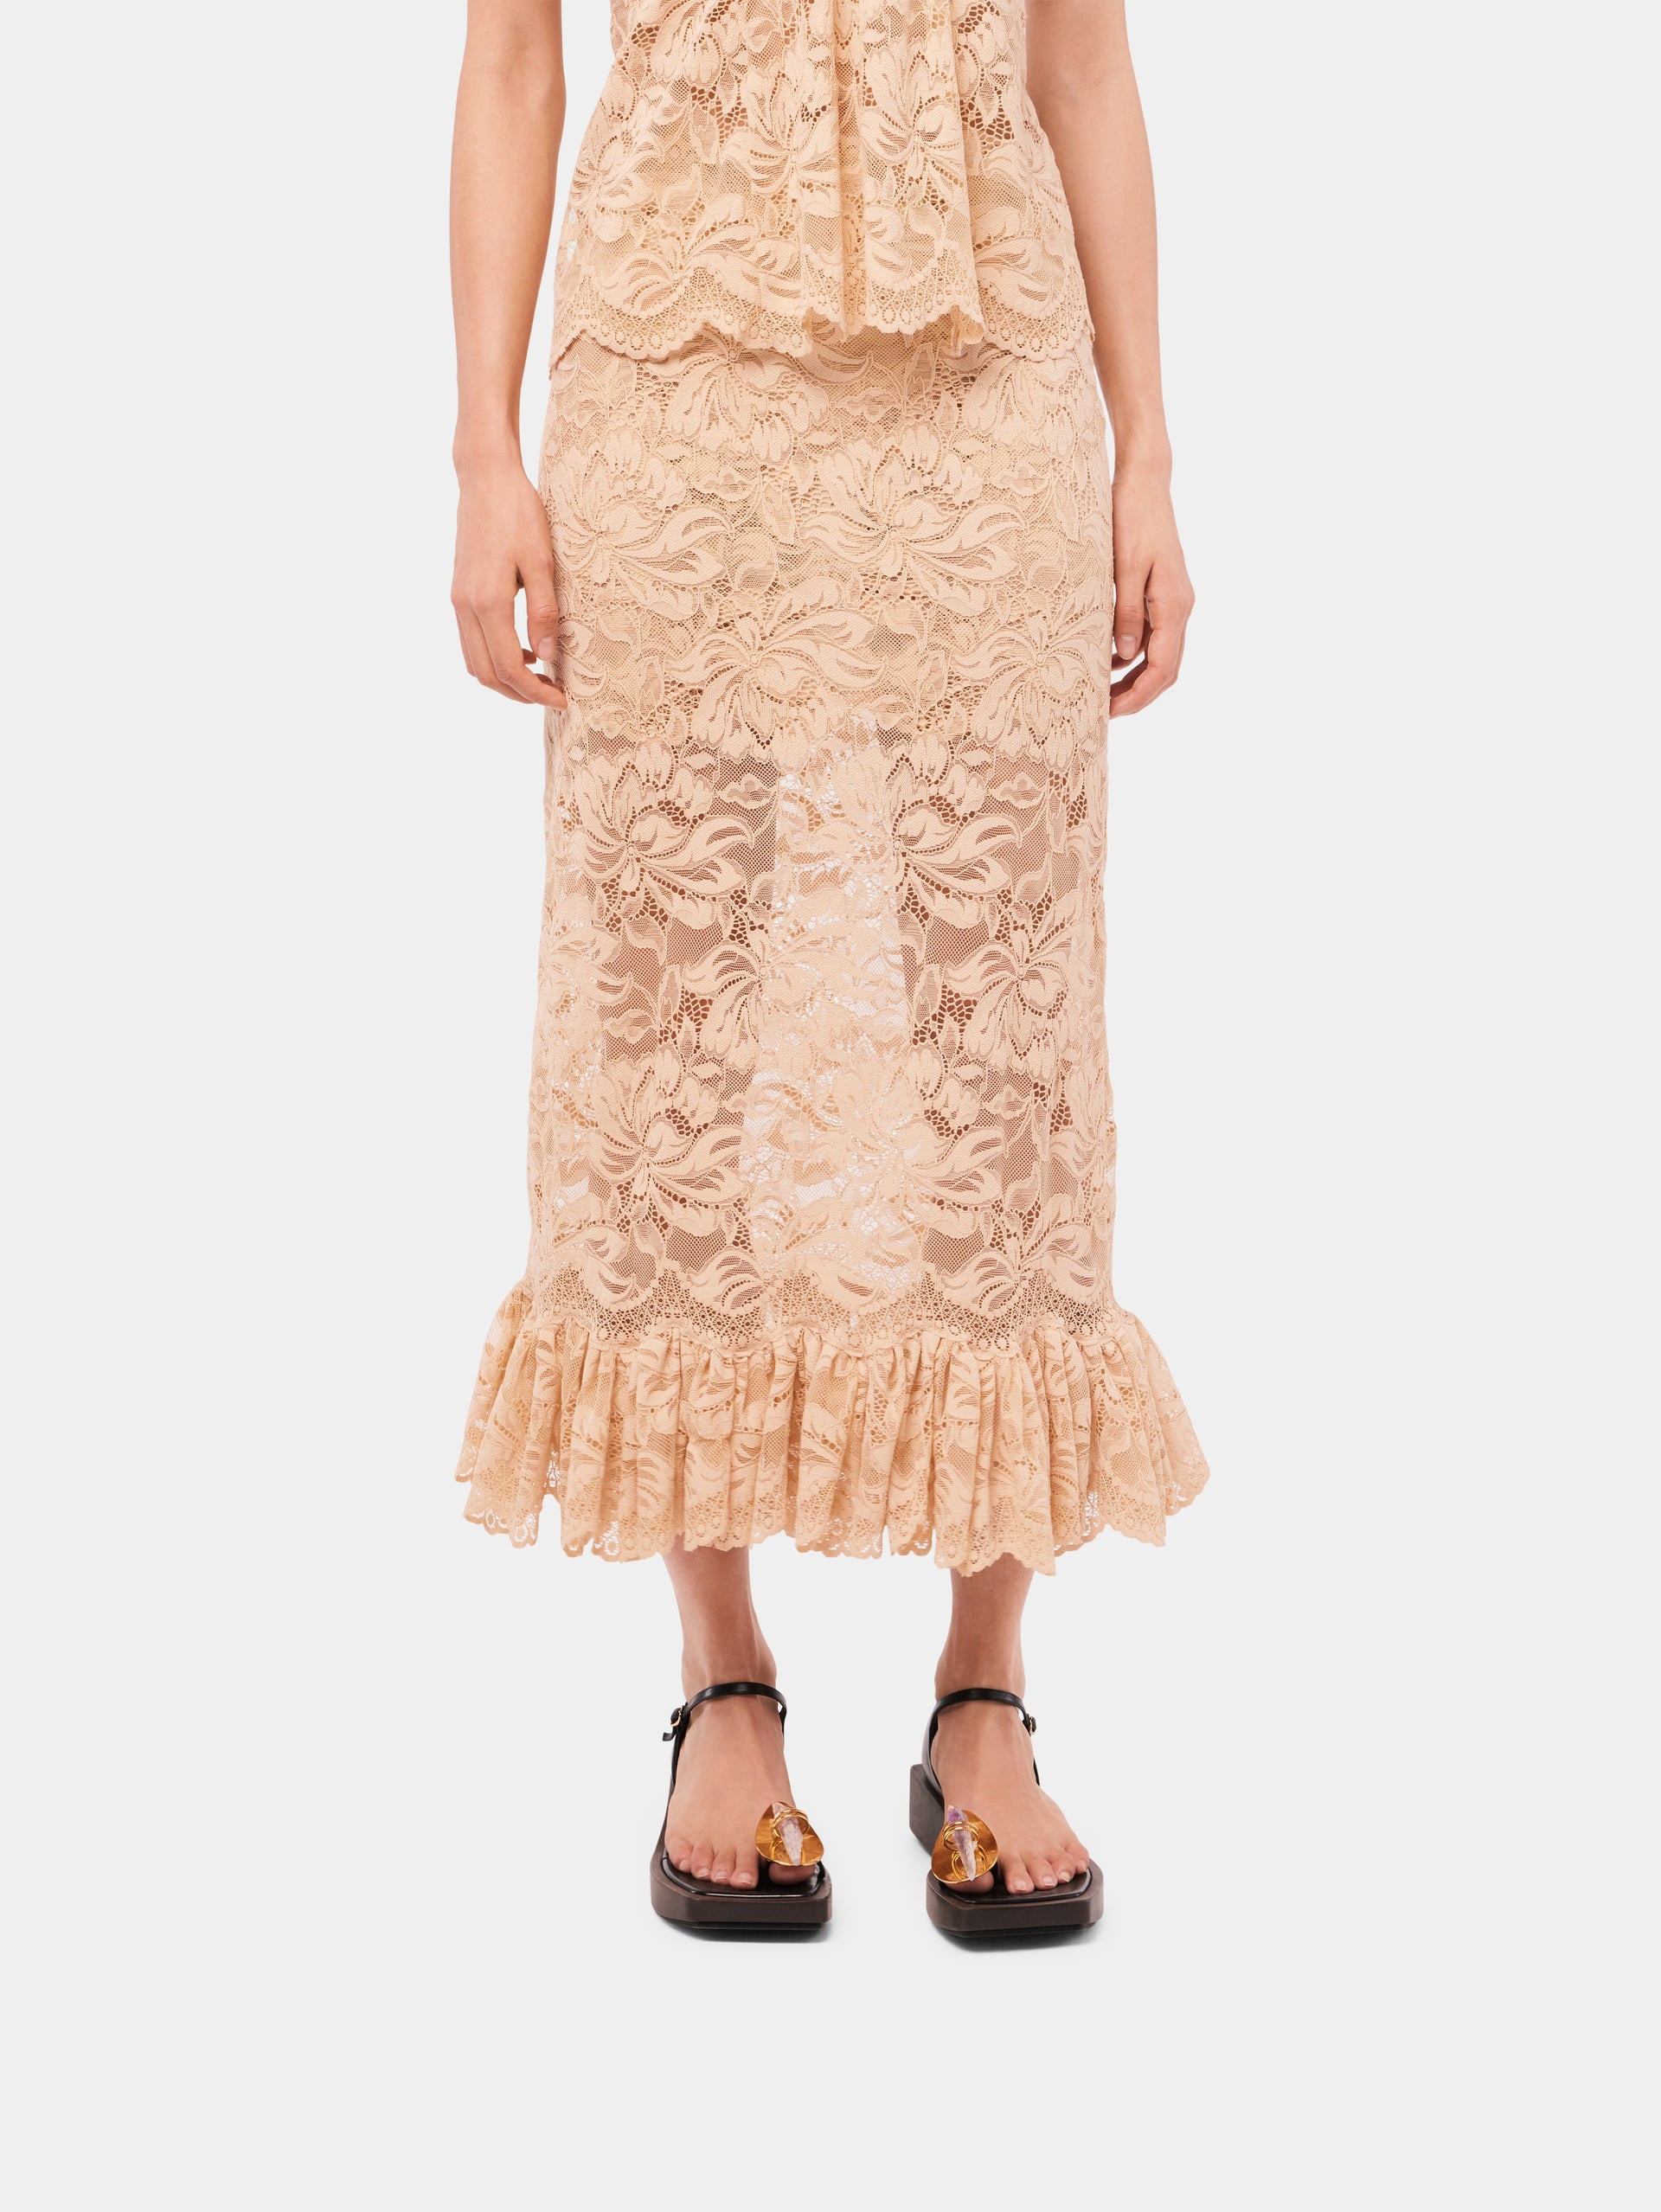 LONG RAFFIA COLORED SKIRT IN LACE - 3